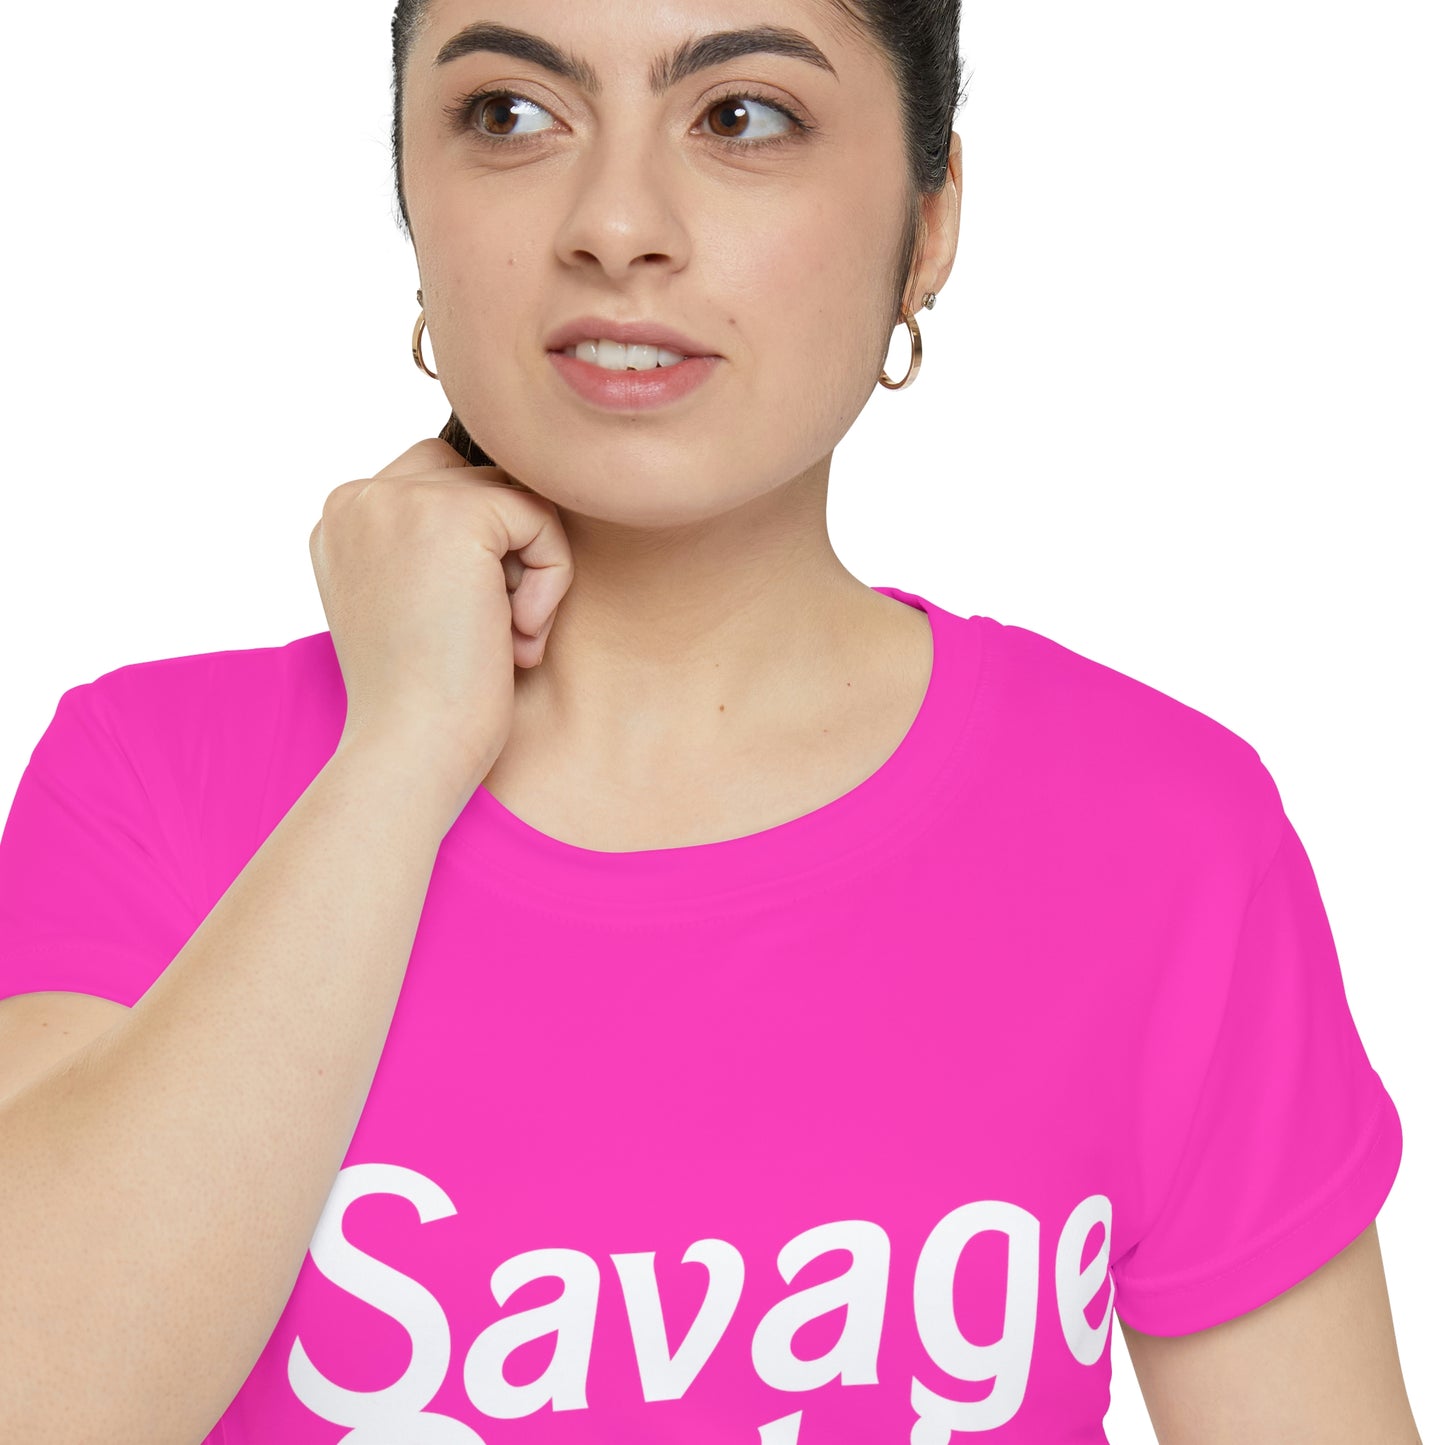 Savage Barbie, Bachelorette Party Shirts, Bridesmaid Gifts, Here comes the Party Tees, Group Party Favor Shirts, Bridal Party Shirt for women